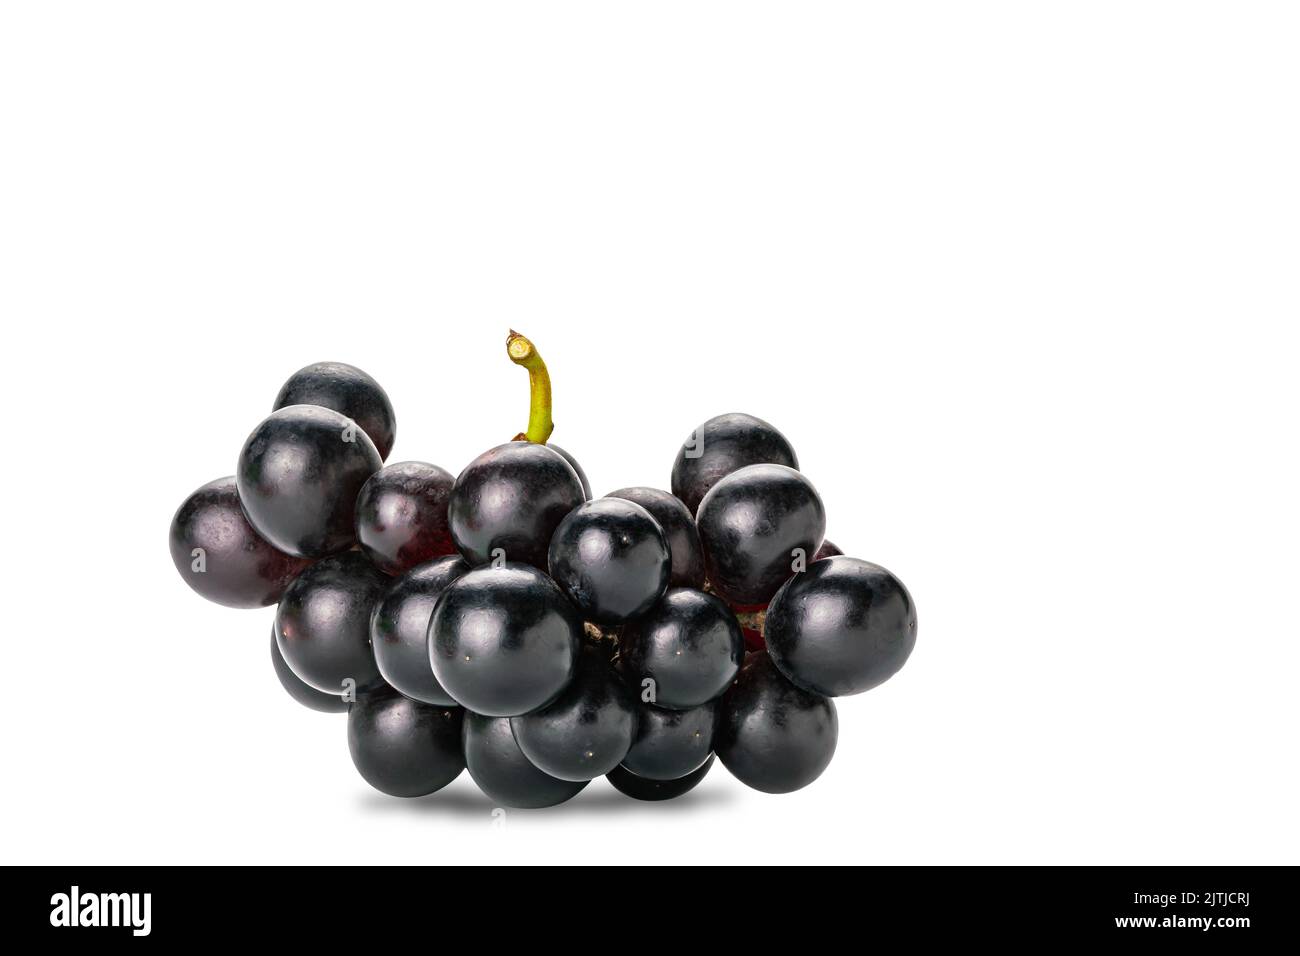 Bunch of fresh black grapes isolated on white background with clipping path. Stock Photo